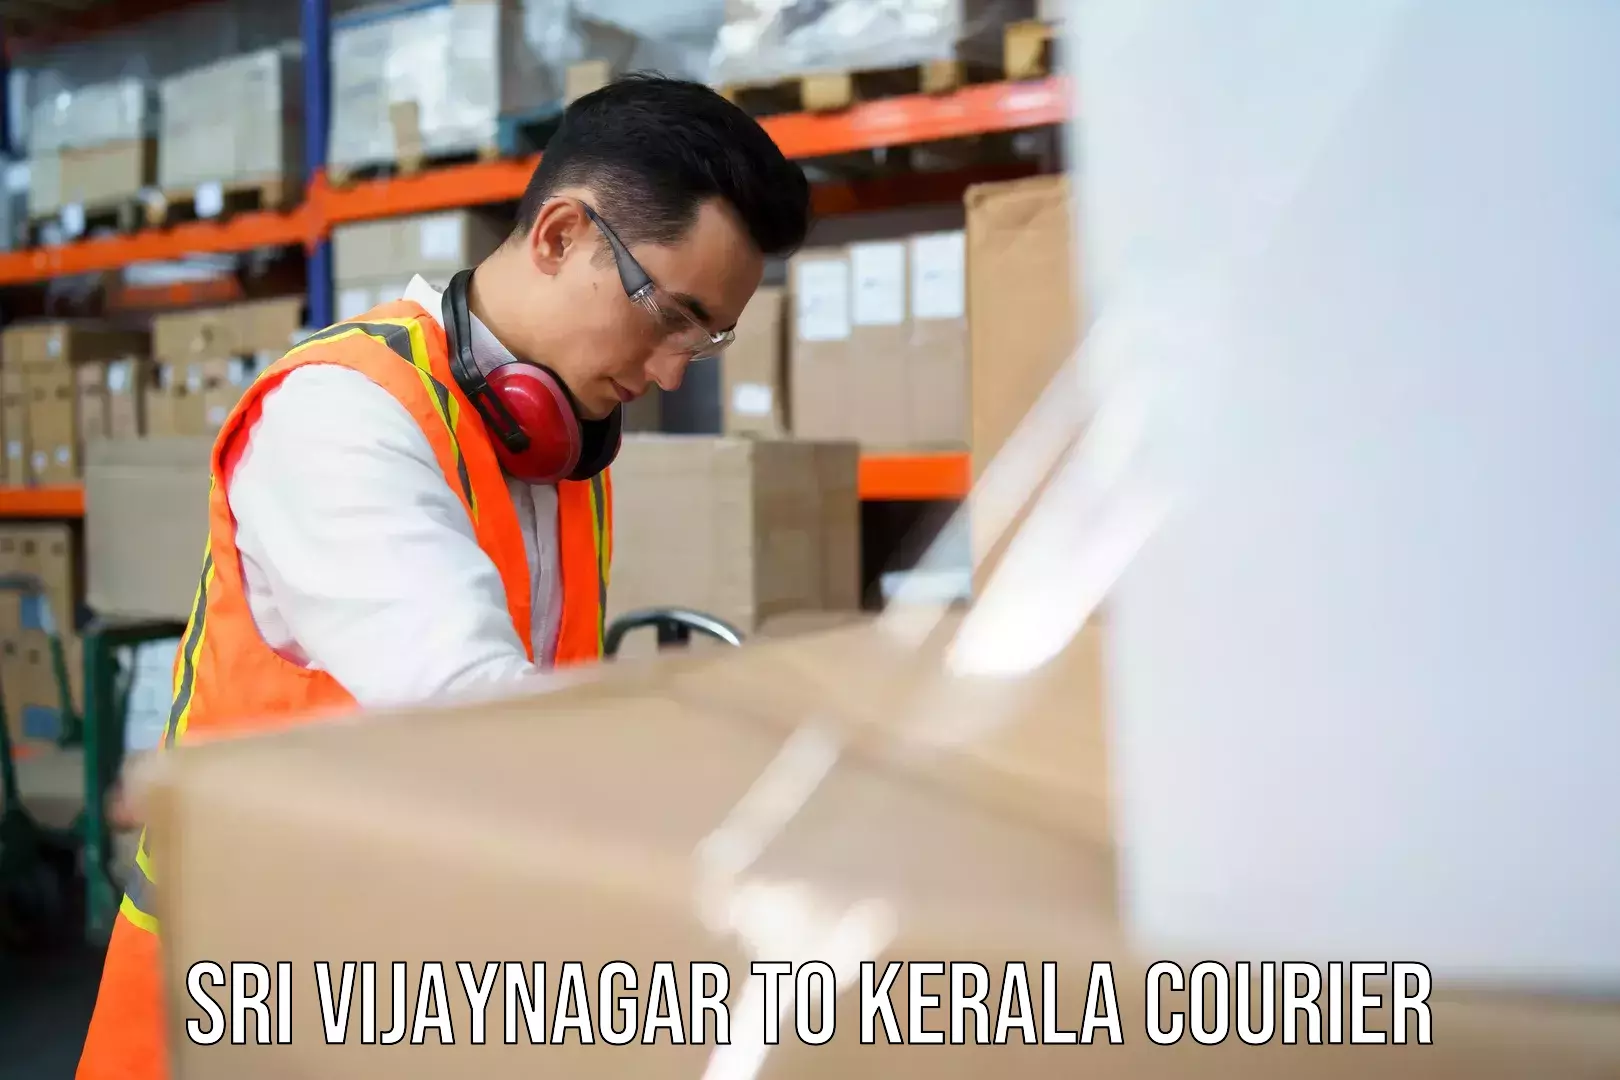 High-quality delivery services in Sri Vijaynagar to Kerala